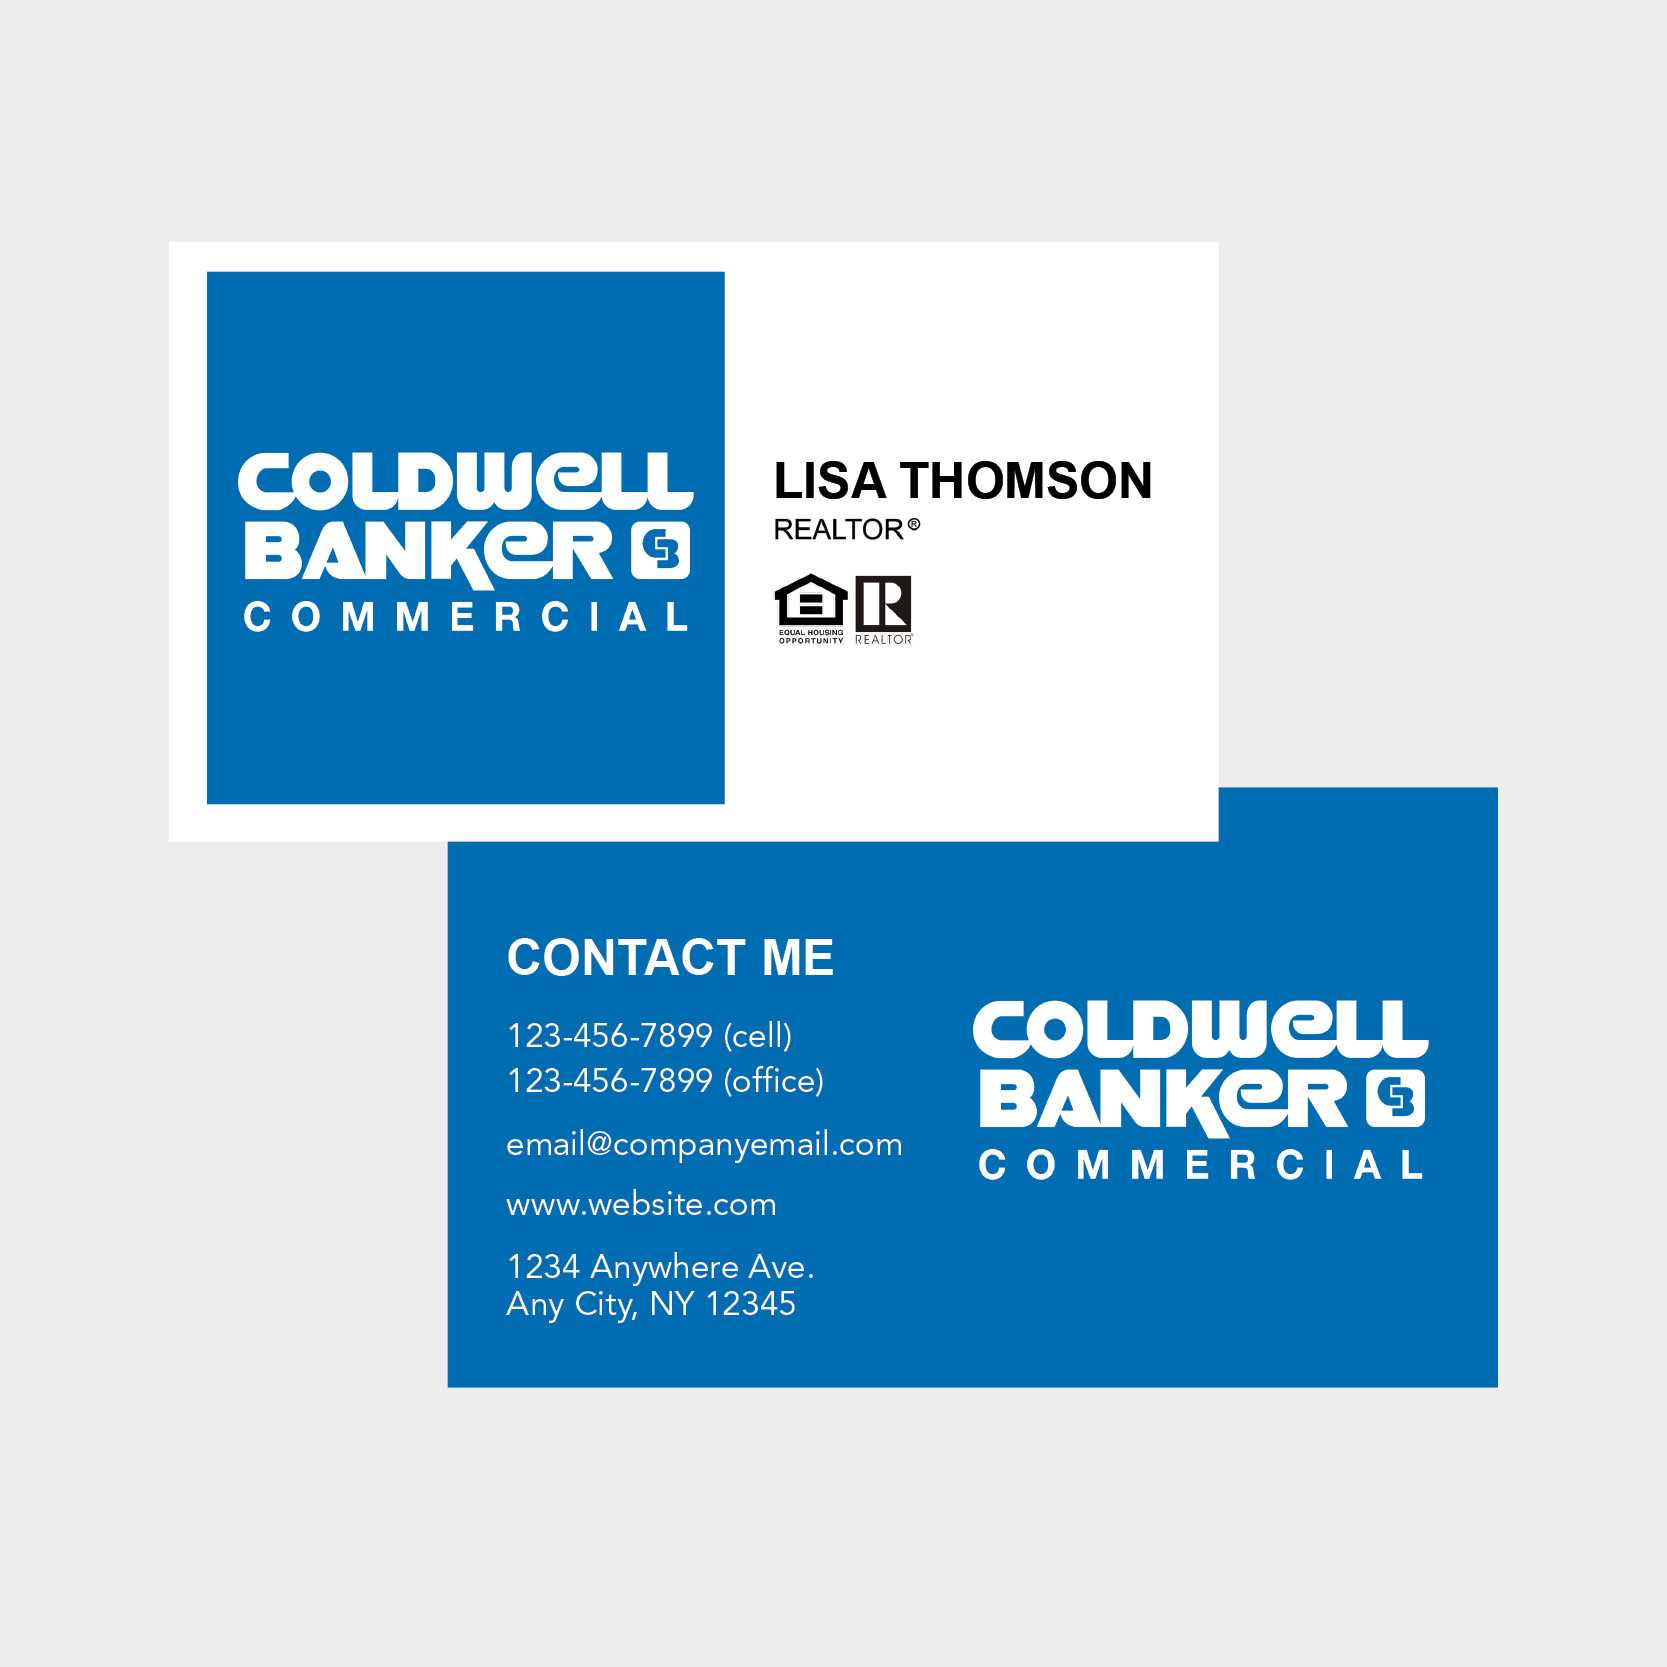 Coldwell Banker Business Cards Pertaining To Coldwell Banker Business Card Template